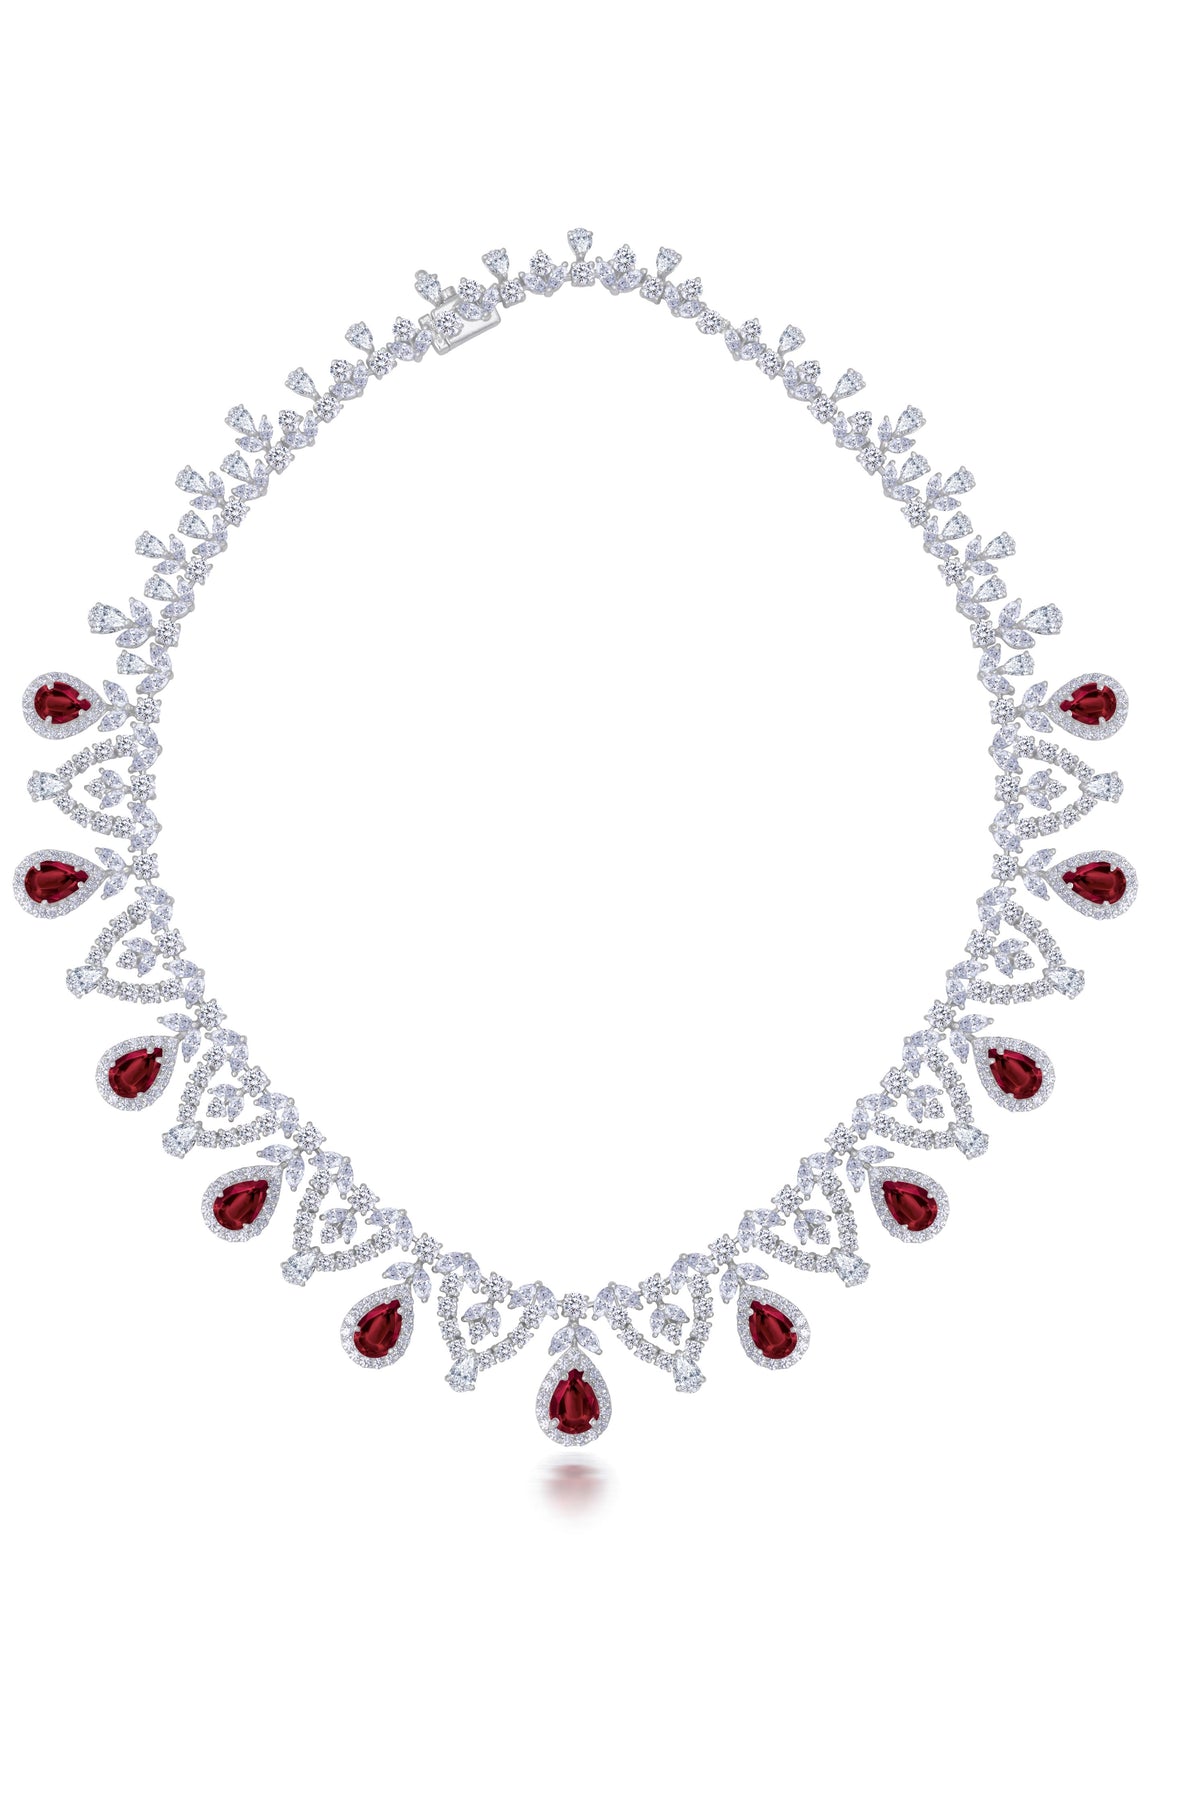 Cocktail White Pear Shaped Rubies Necklace